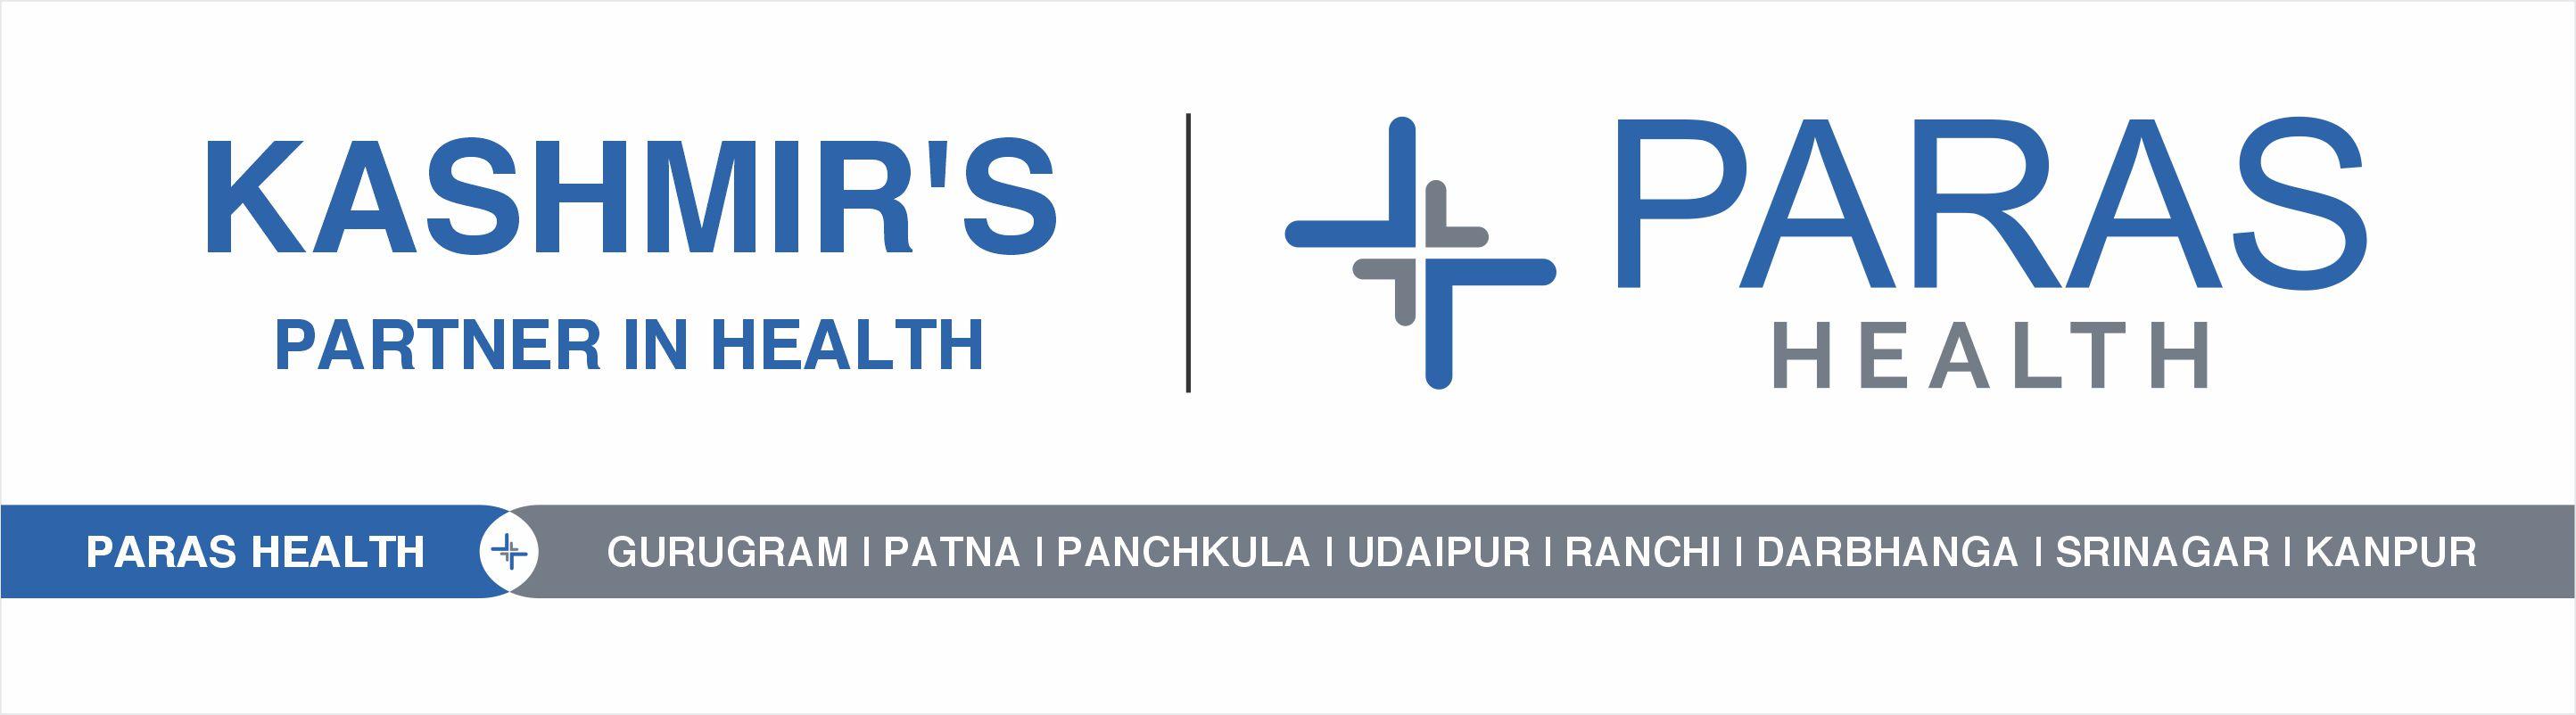 Paras Health - The New Symbol for Partnership in Health